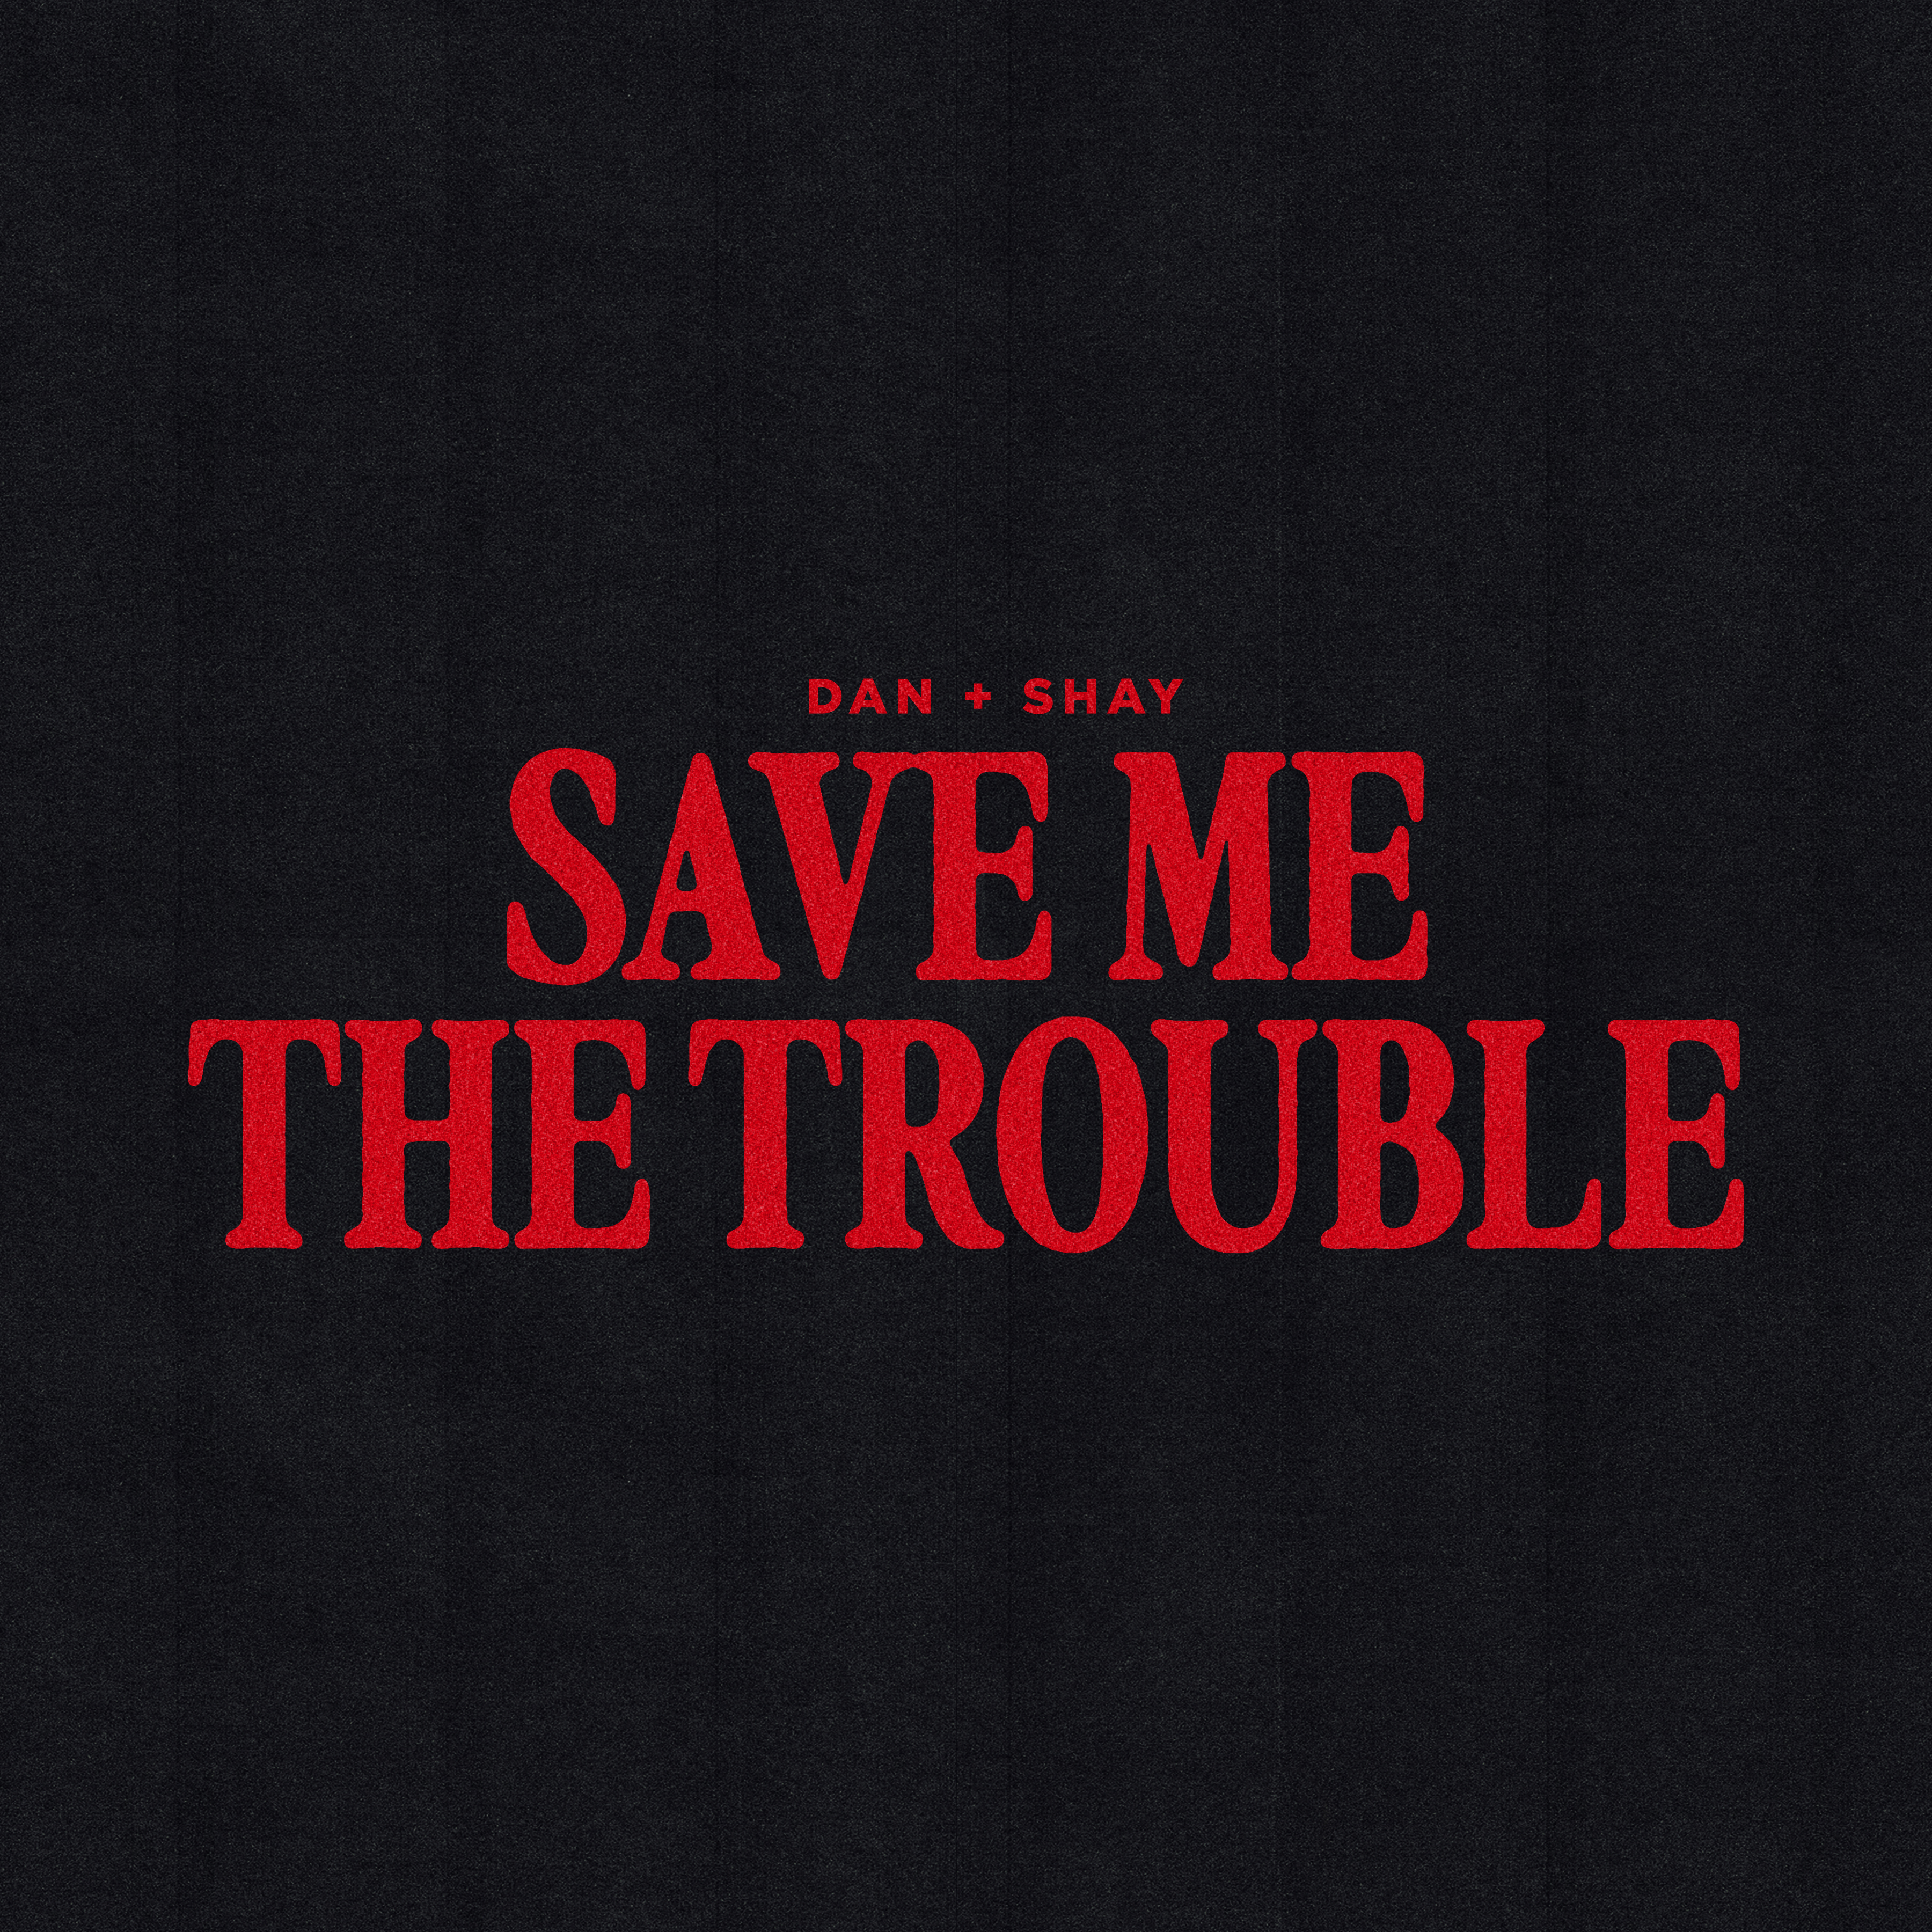 DAN + SHAY ARE NO. 1 MOST-ADDED AT COUNTRY RADIO WITH “SAVE ME THE TROUBLE”